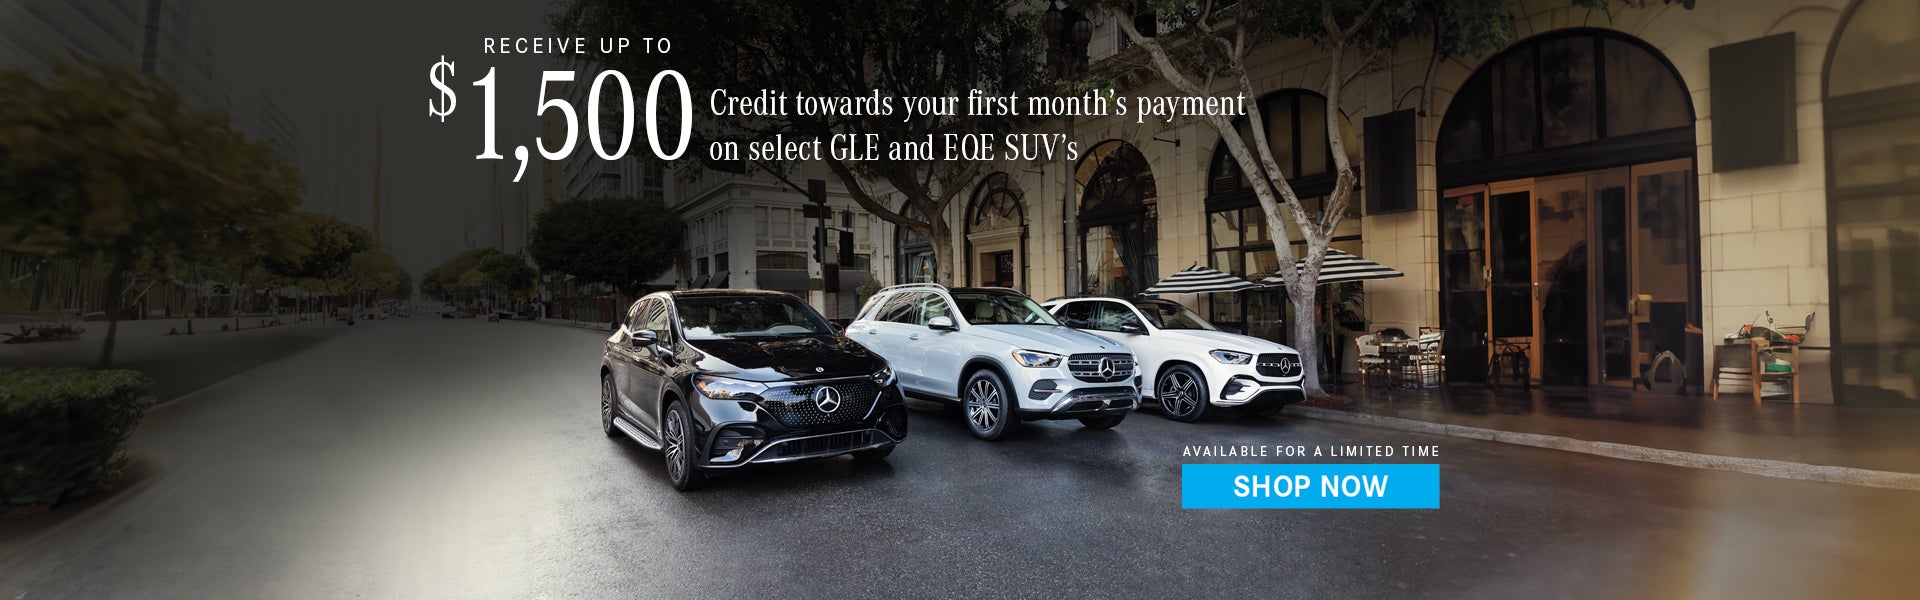 Mercedes-Benz GLE, GLE Hybrid and EQE SUV special offer